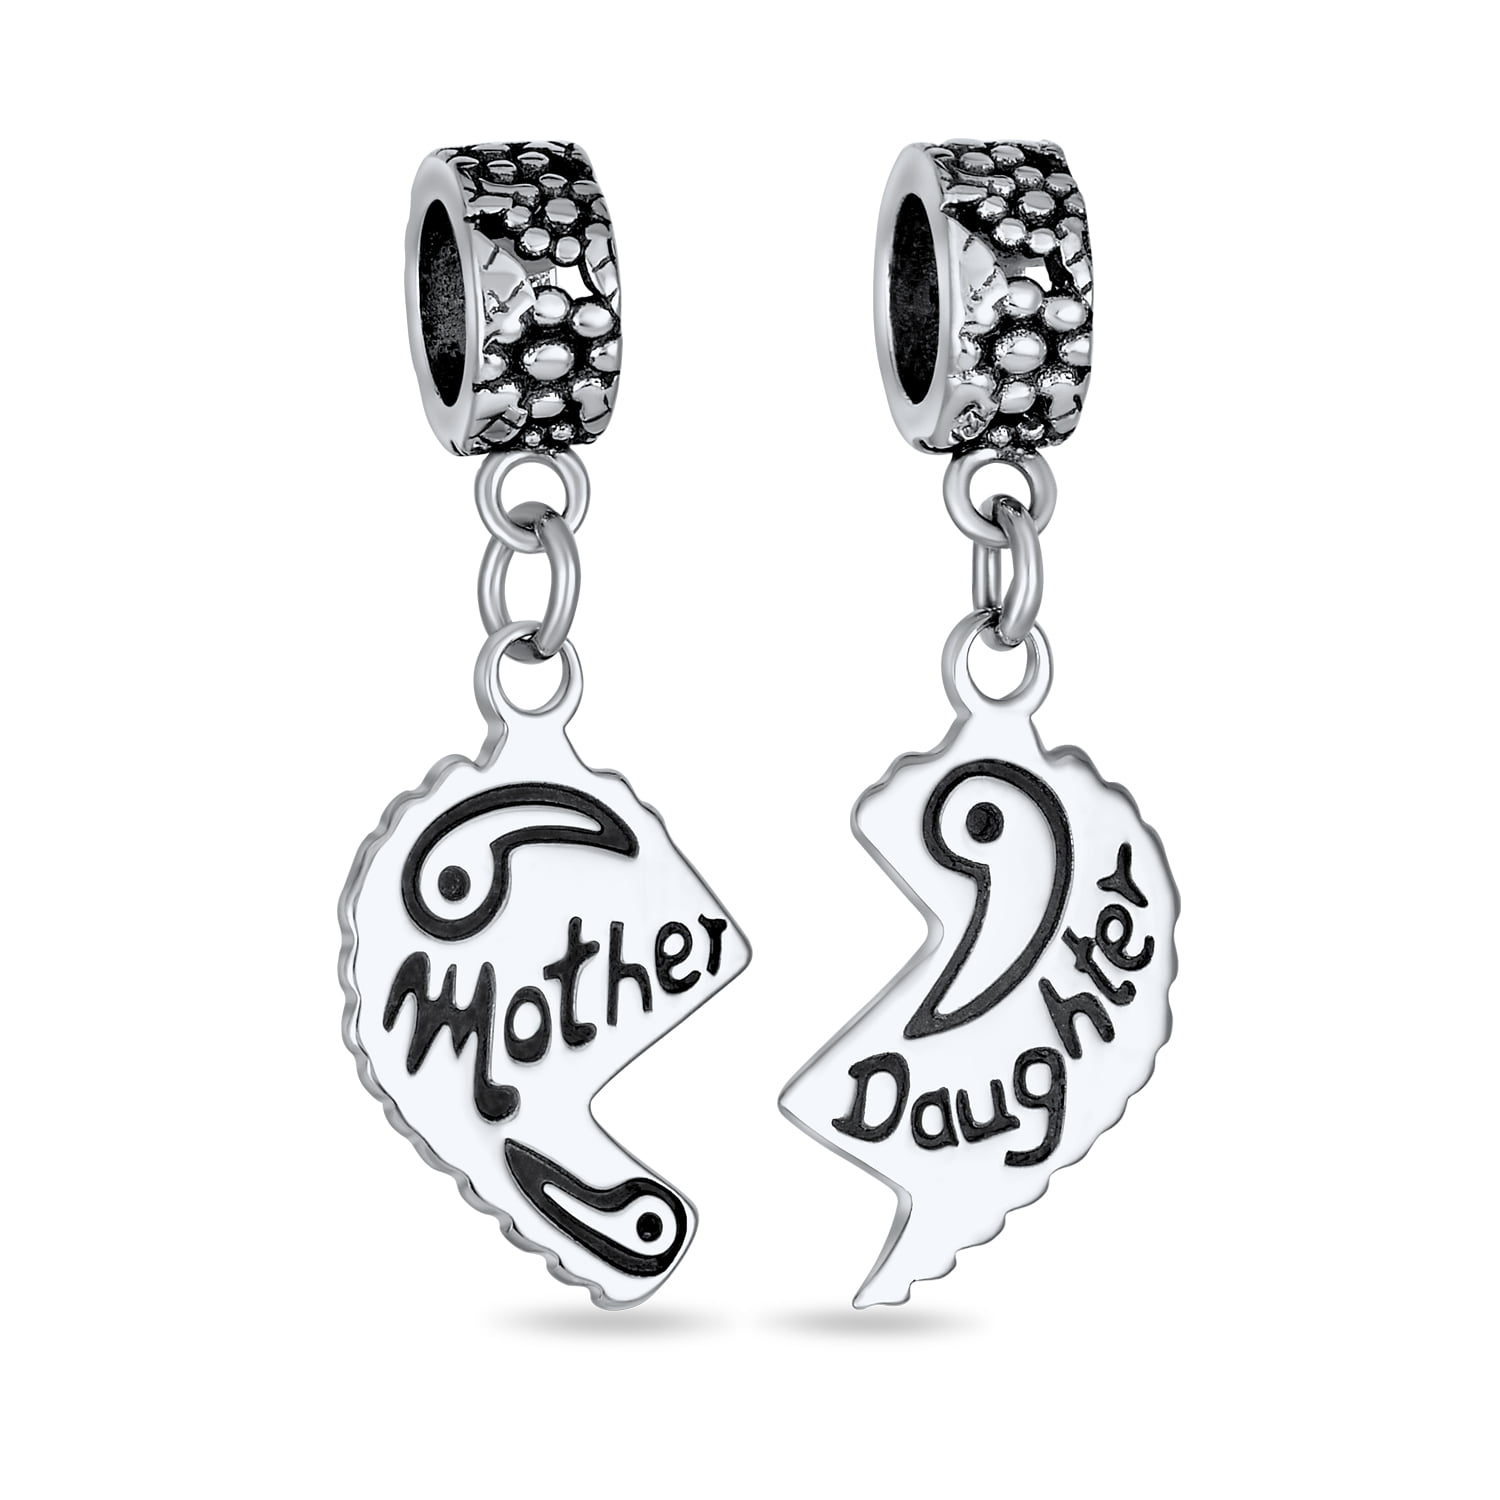 Mothers Day Charms,925 Sterling Silver Mother Daughter Charms Best Mom Charms,Dog Paw Charms Family Tree and Best Friend Beads fits European Bracelet Gifts for Mom/Sister/Christmas/Birthday